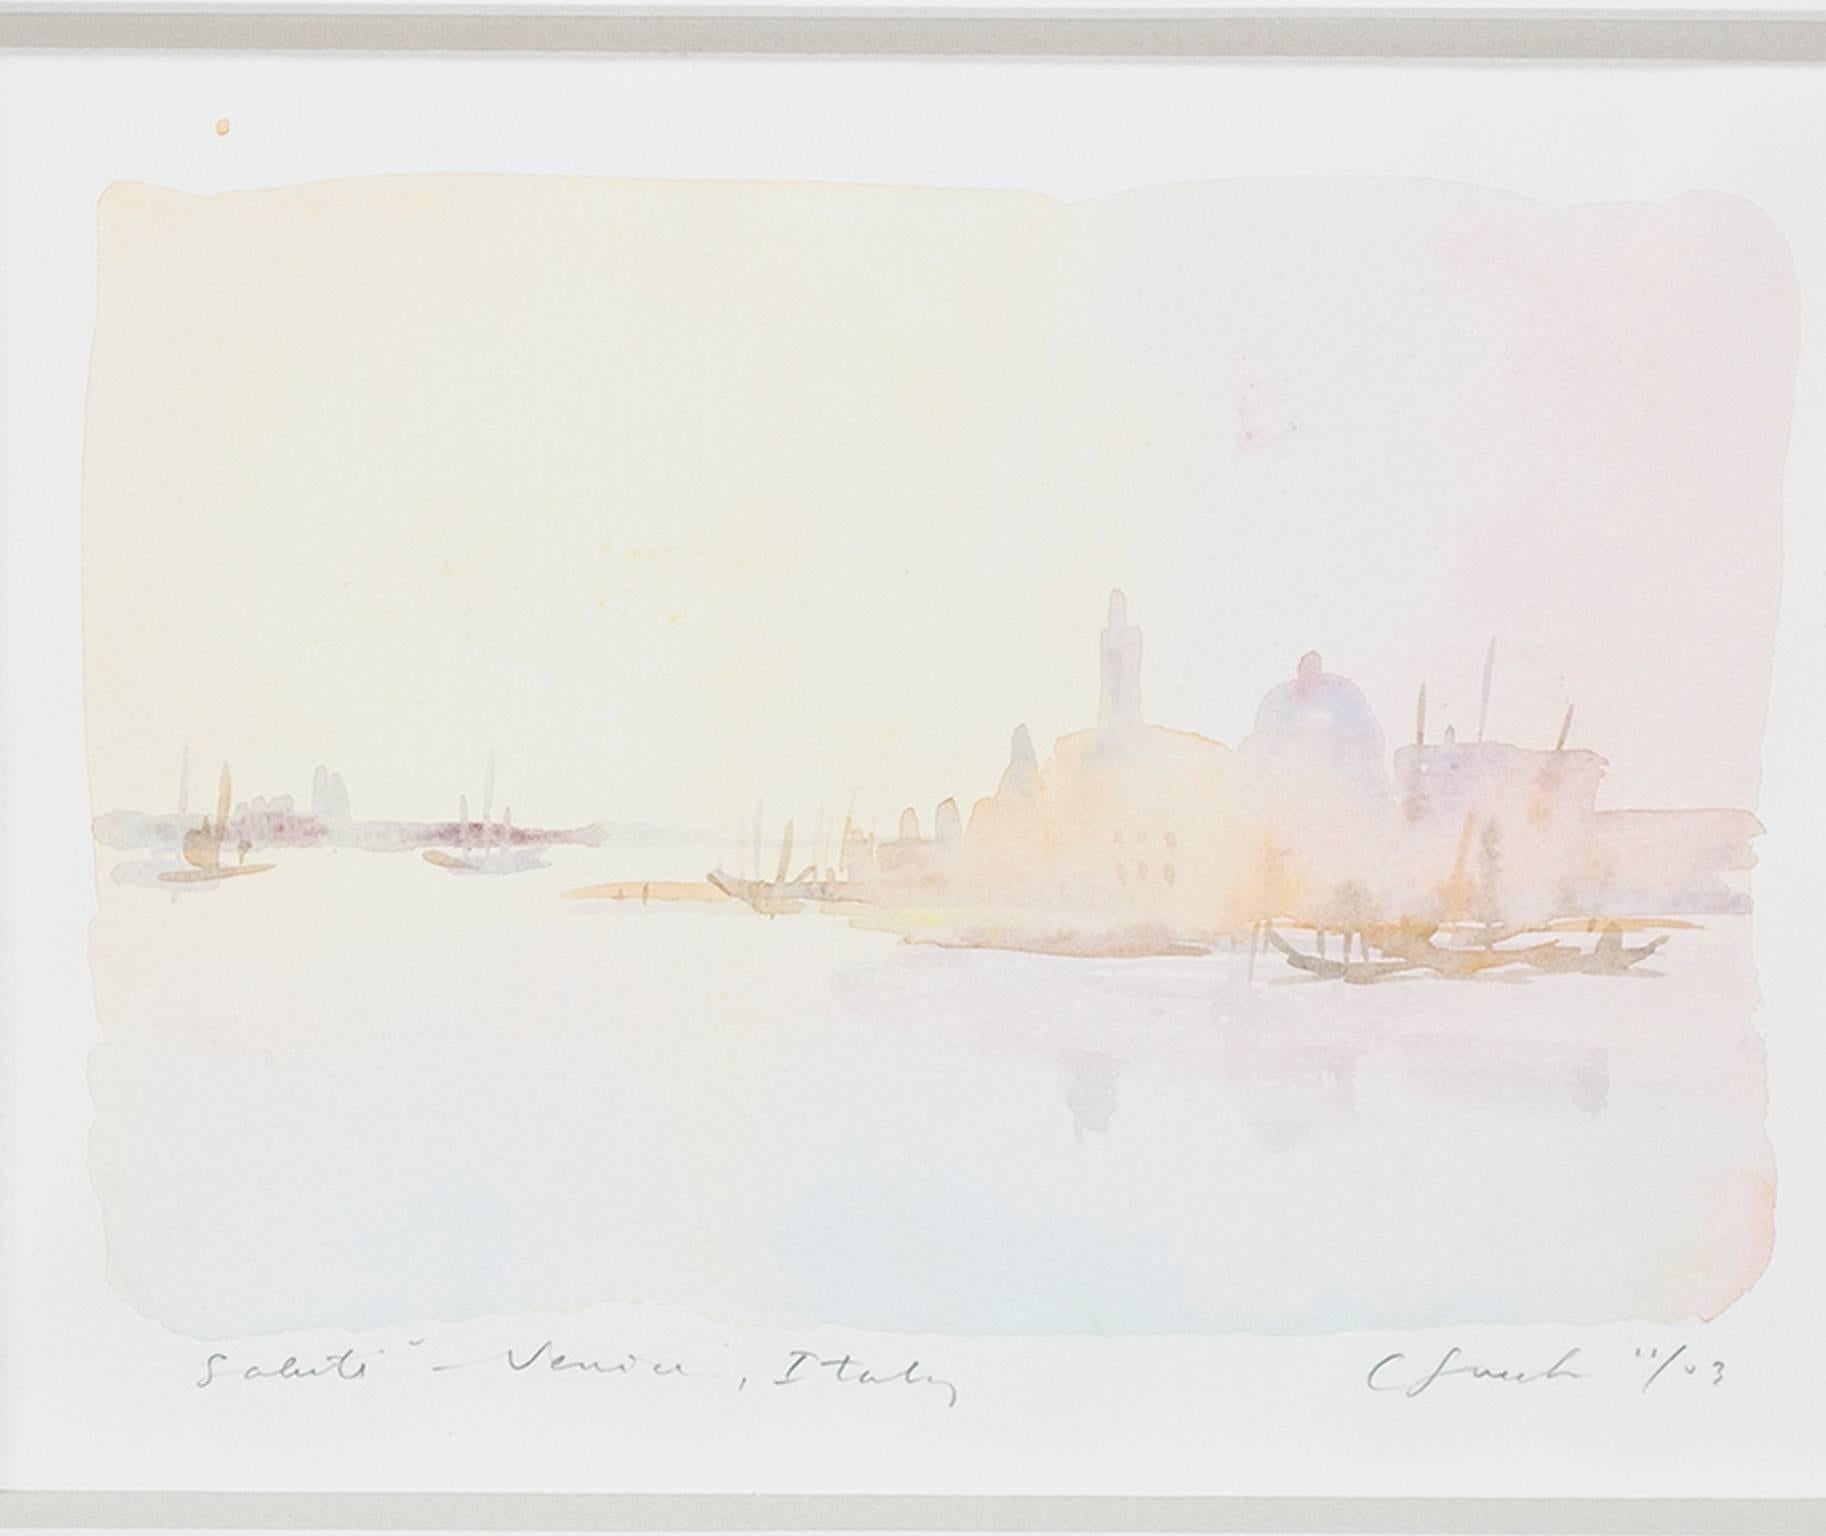 "Salute - Venice, Italy" is an original watercolor painting on Holbein watercolor paper signed and dated in pencil lower right and titled lower left. These petite watercolors that make up Lueck's portfolio serve as windows into the artist's world.